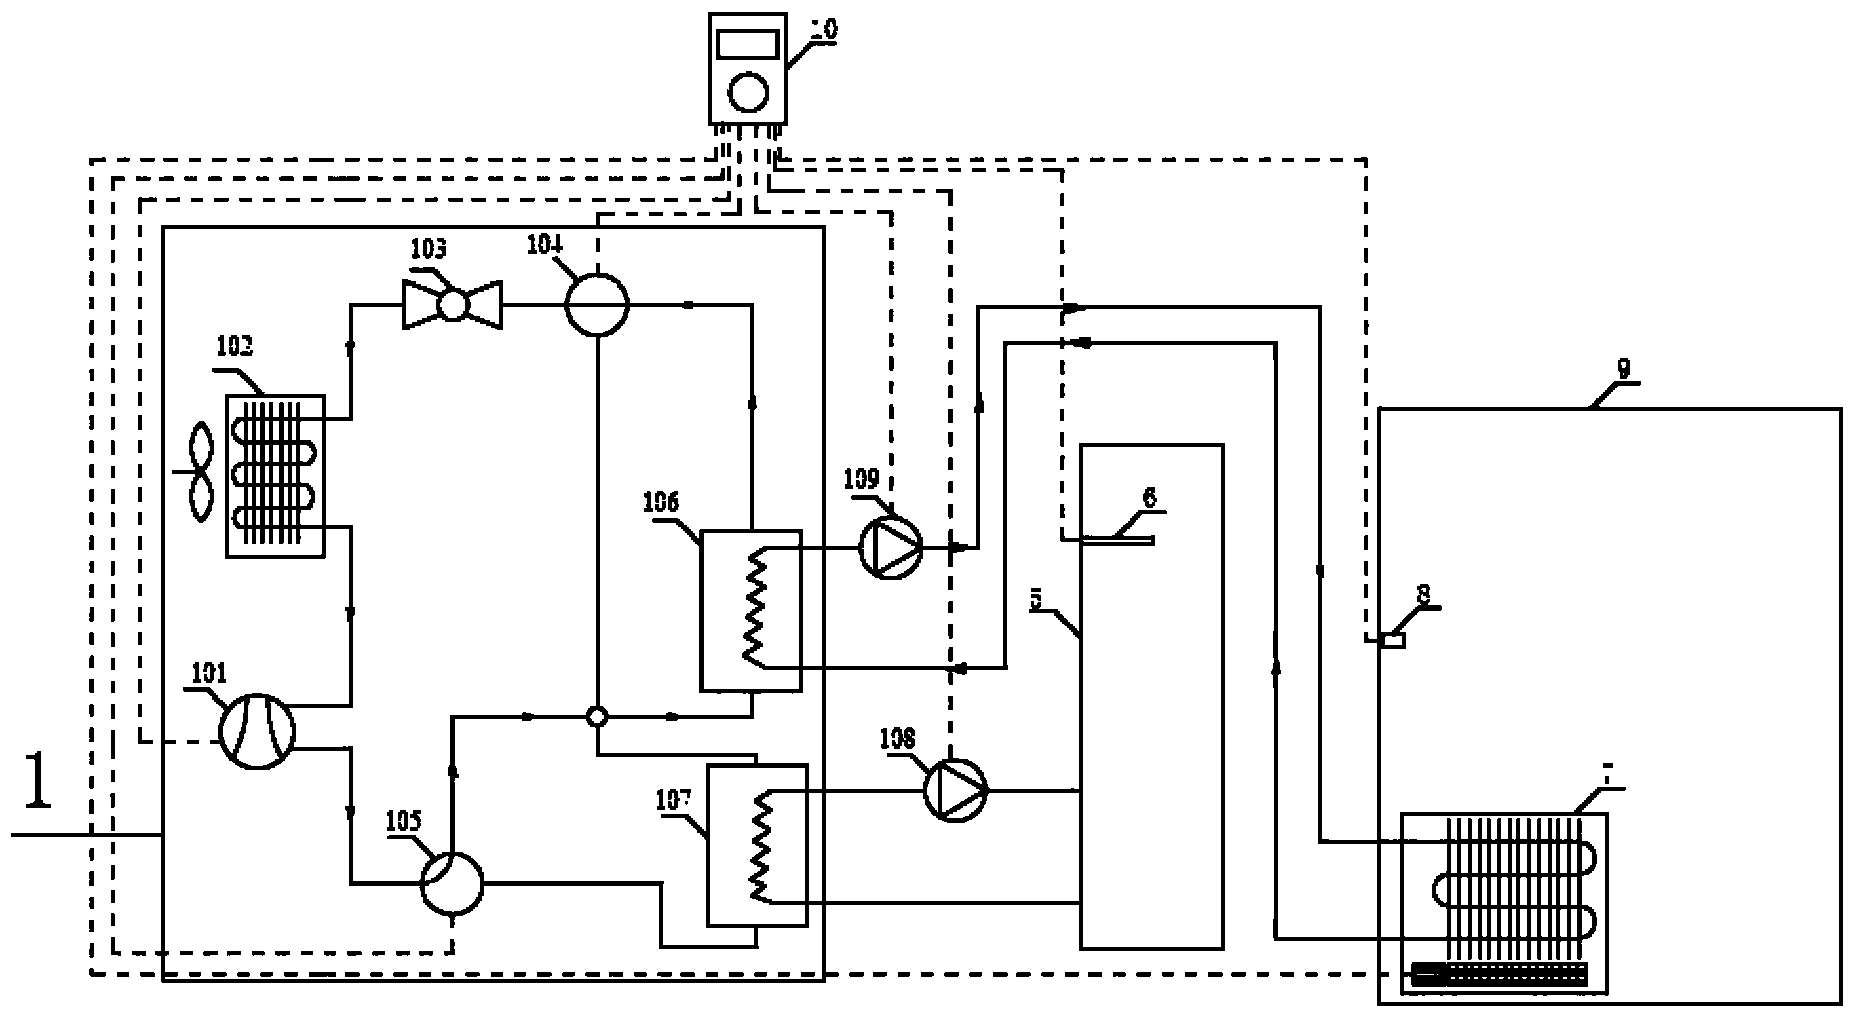 Heat pump air-conditioning system combining air source heat pump with small temperature difference heat exchange tail end